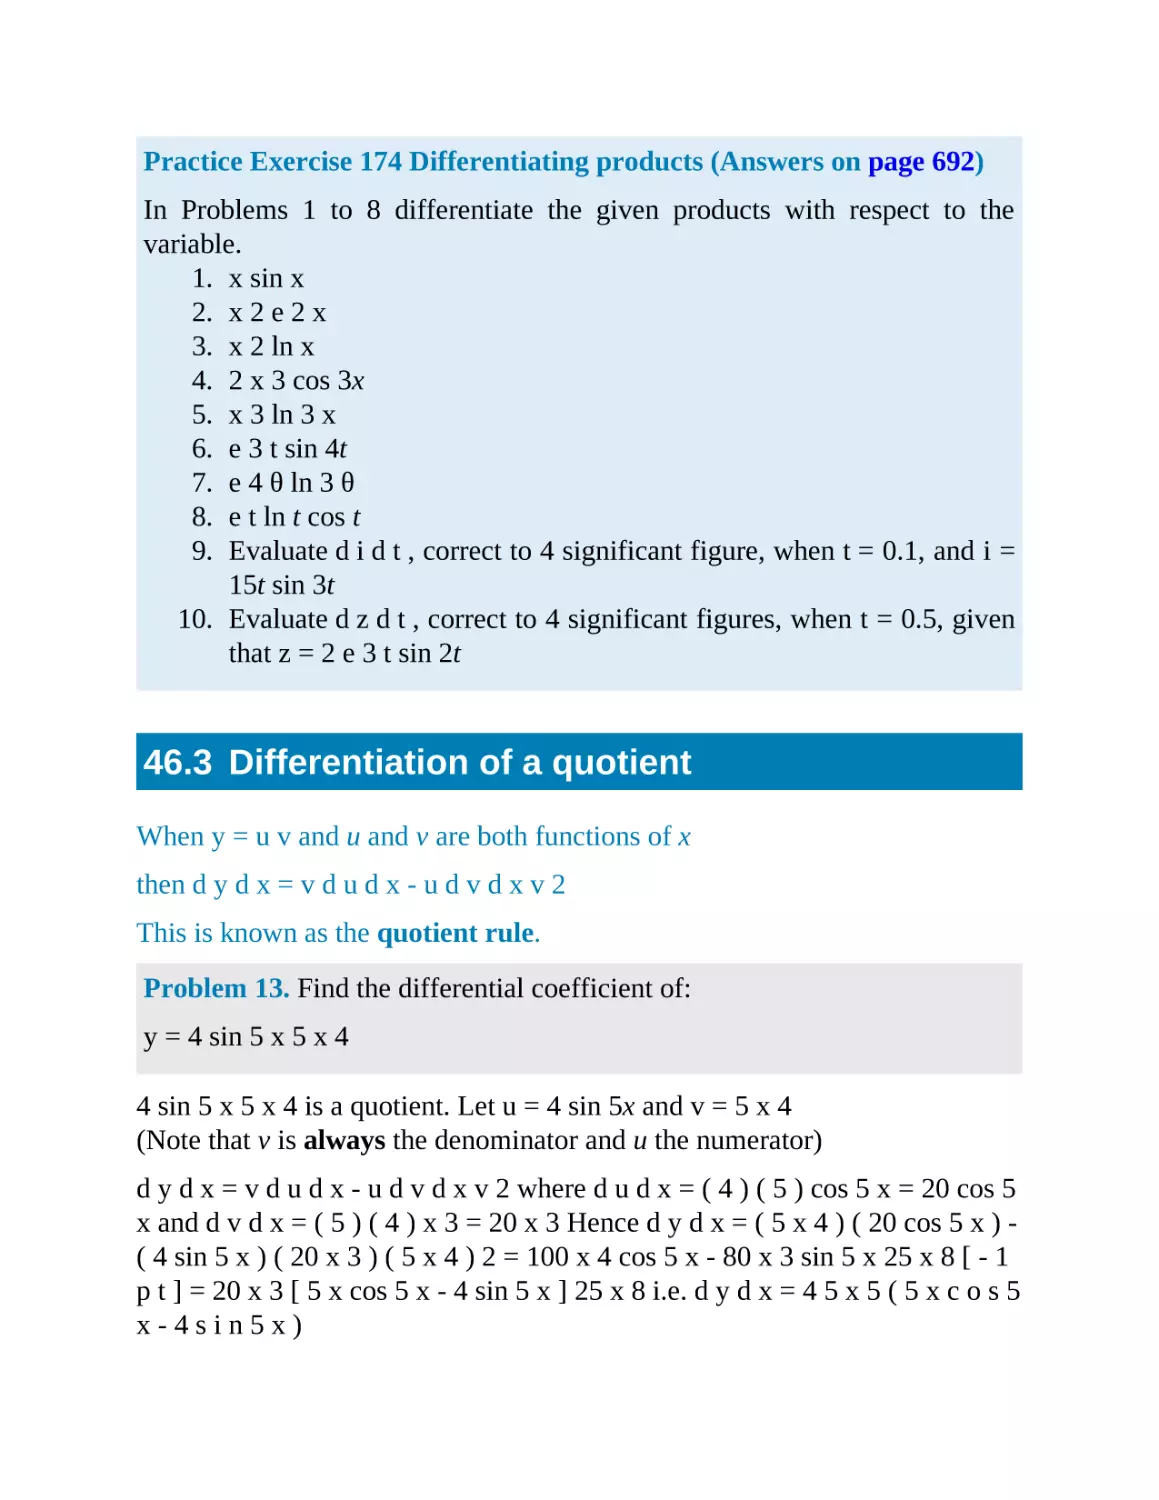 46.3 Differentiation of a quotient